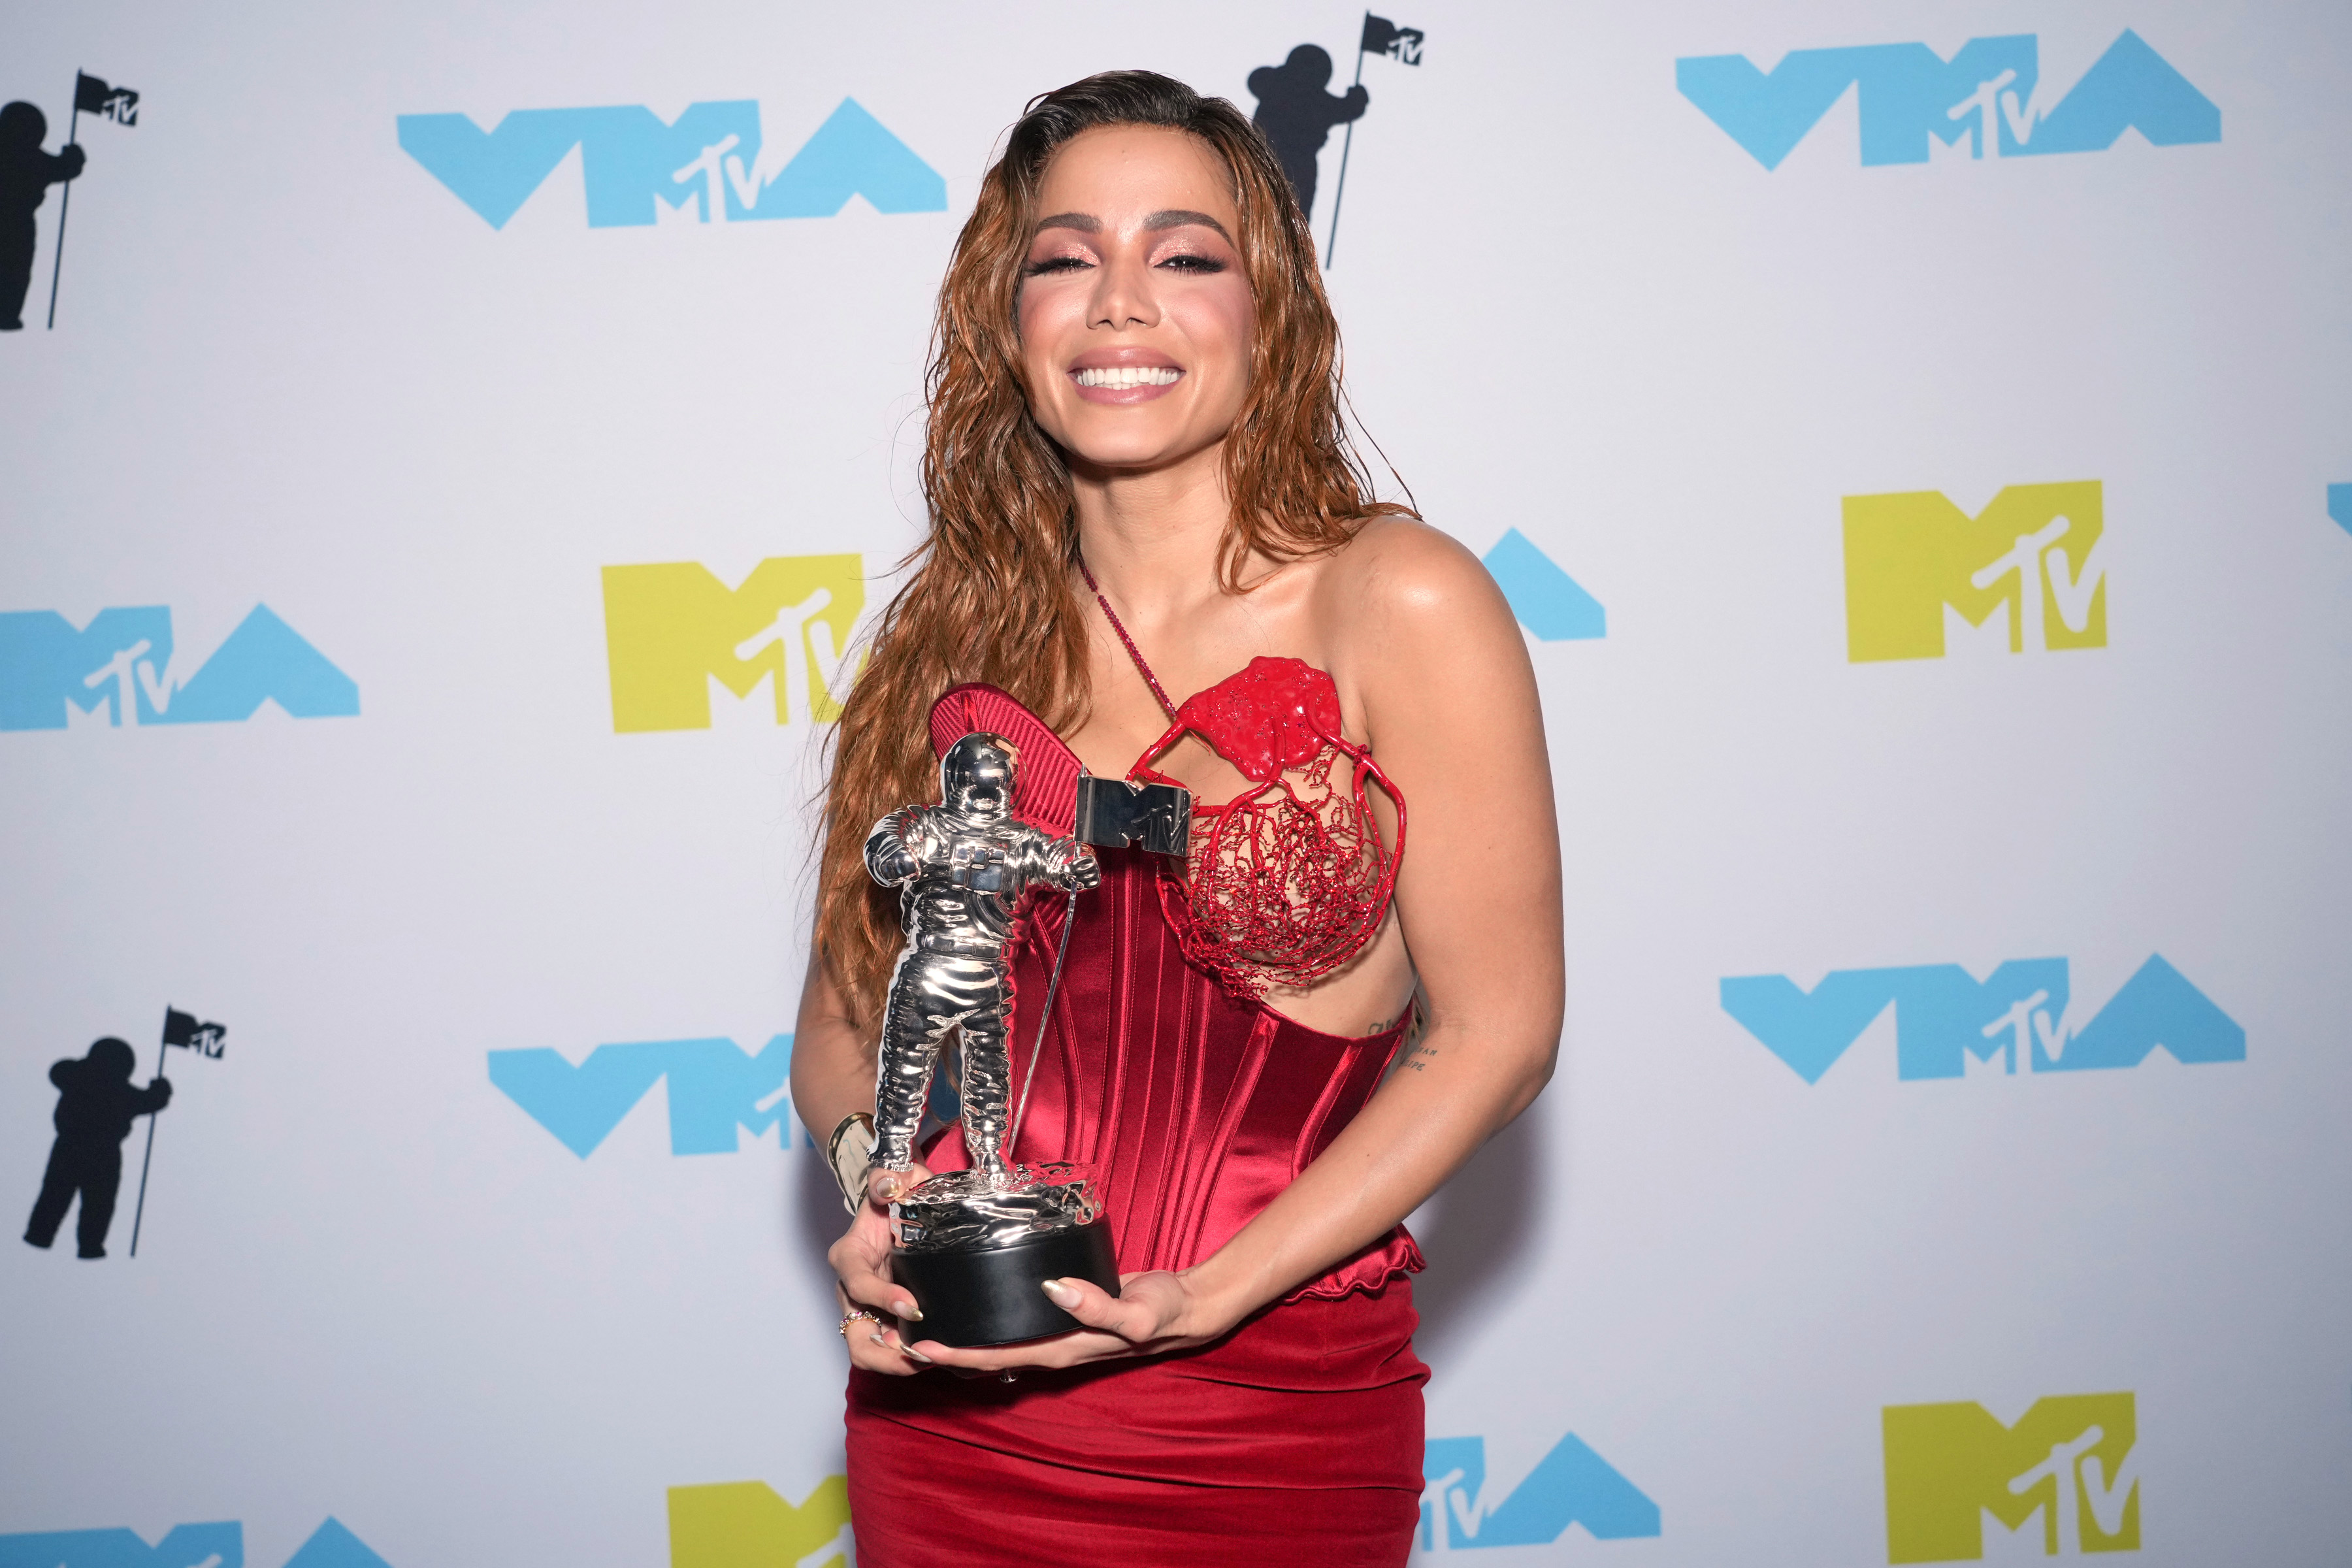 Anitta winner of MTV Video Music Award for Best Latino Artist is seen backstage at the 2022 MTV VMAs at Prudential Center on August 28, 2022 in Newark, New Jersey. 